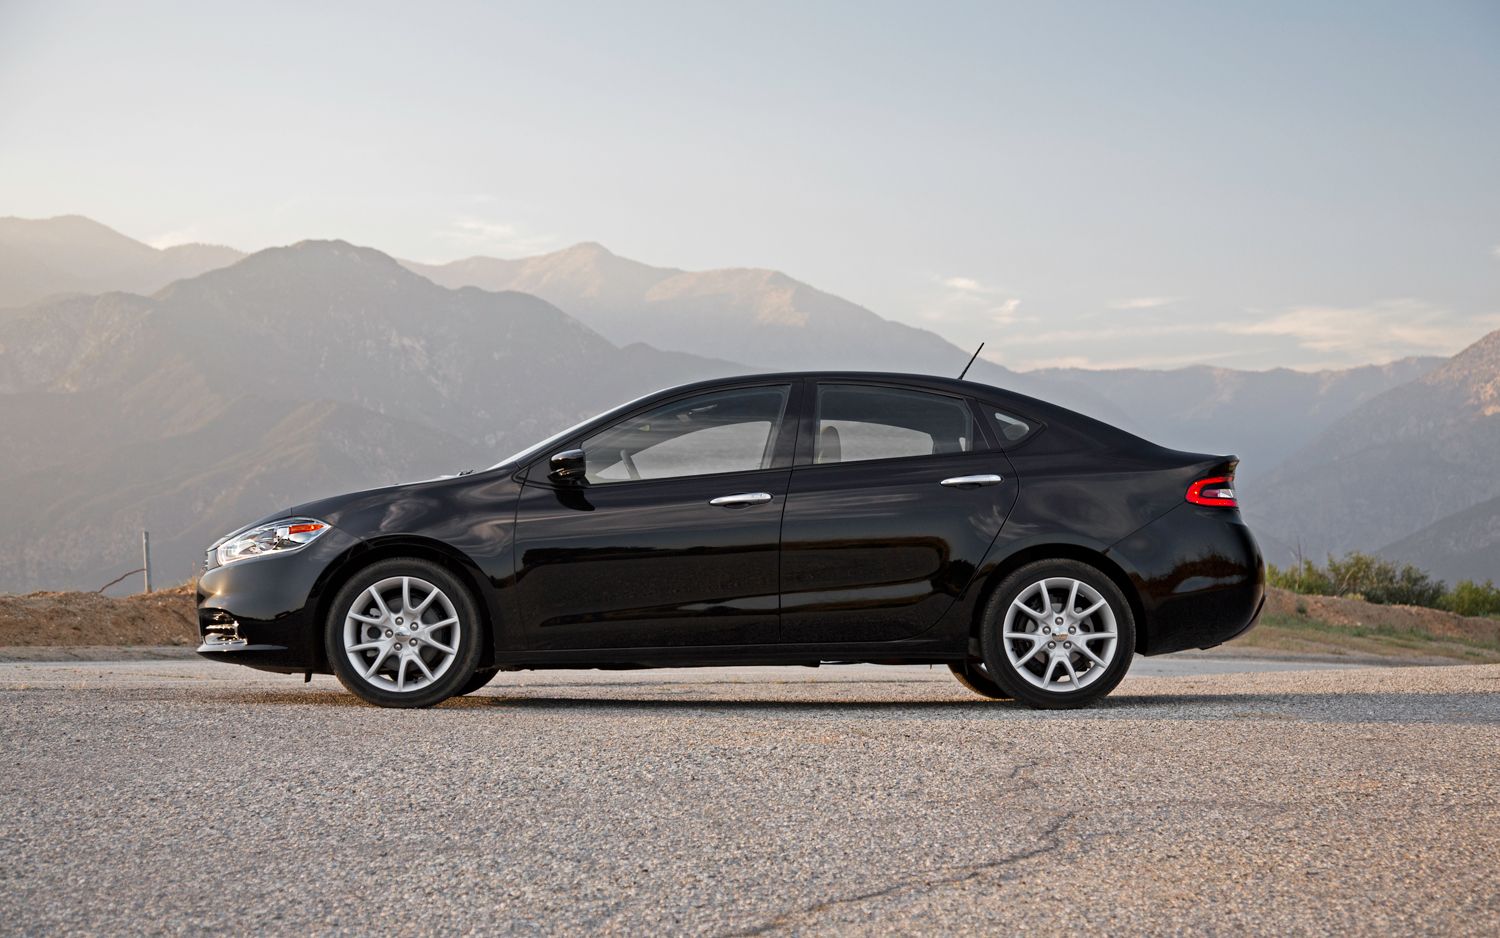 2013-dodge-dart-limited-side.jpg. some of the stance is similar but there